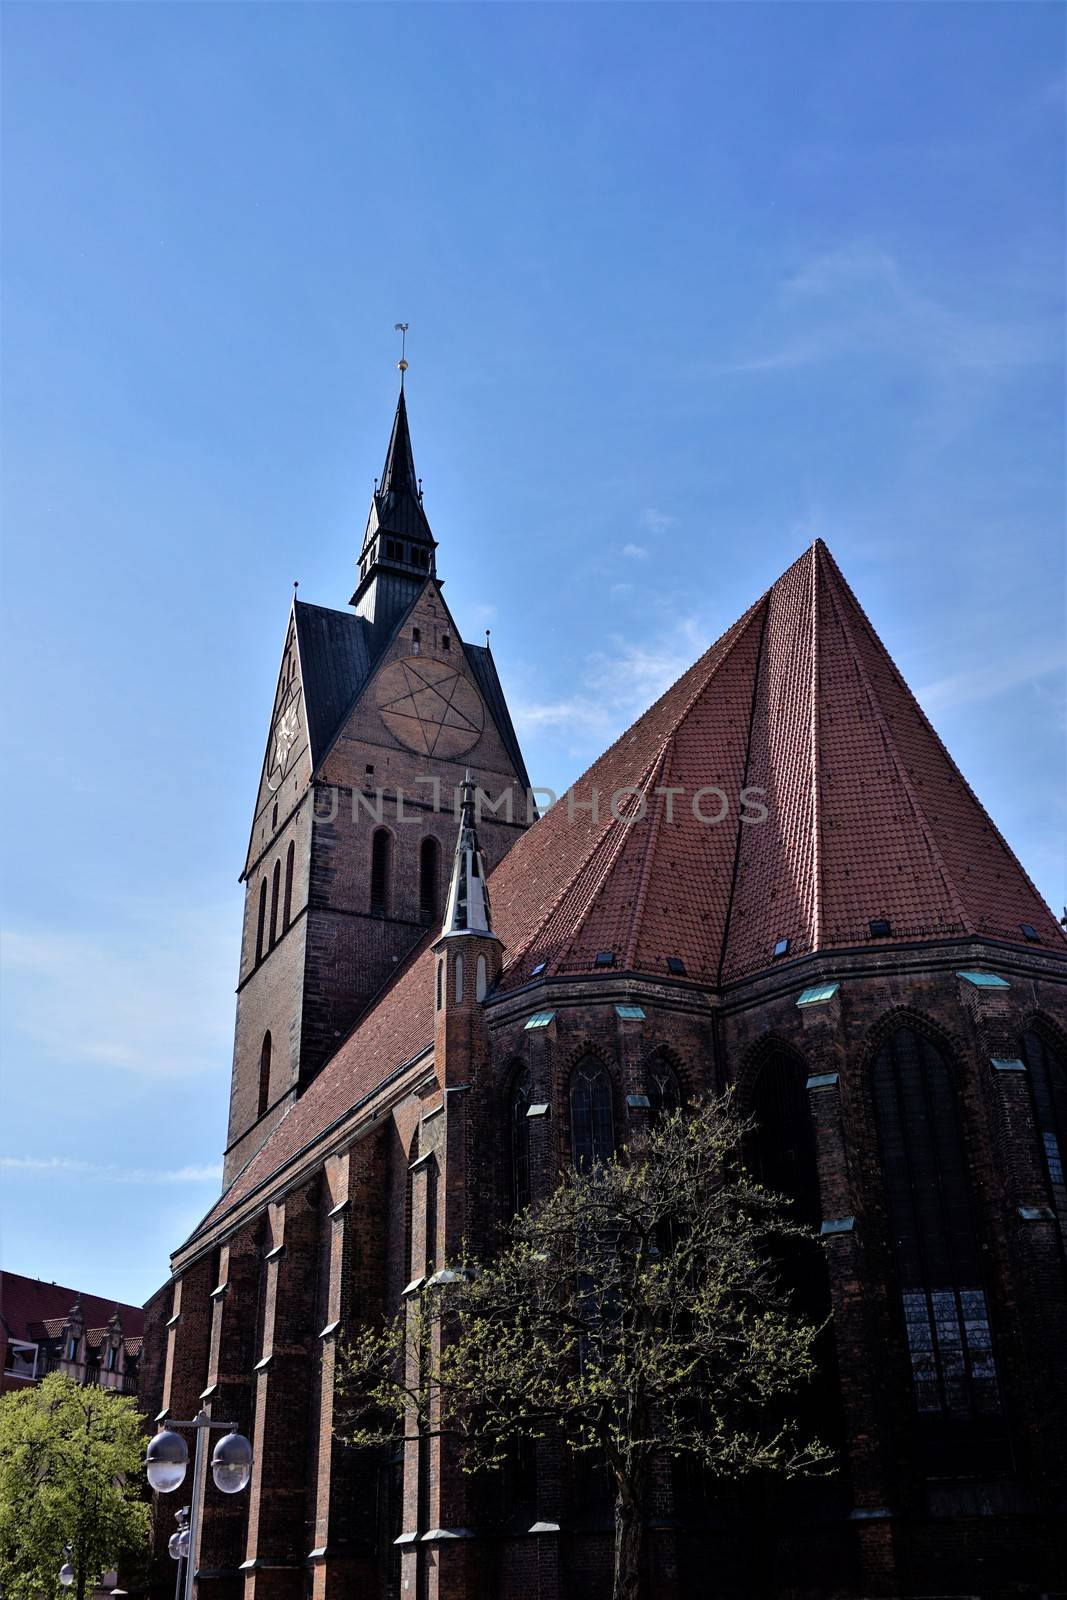 Marktkirche Hannover on a sunny day in front of blue sky by pisces2386